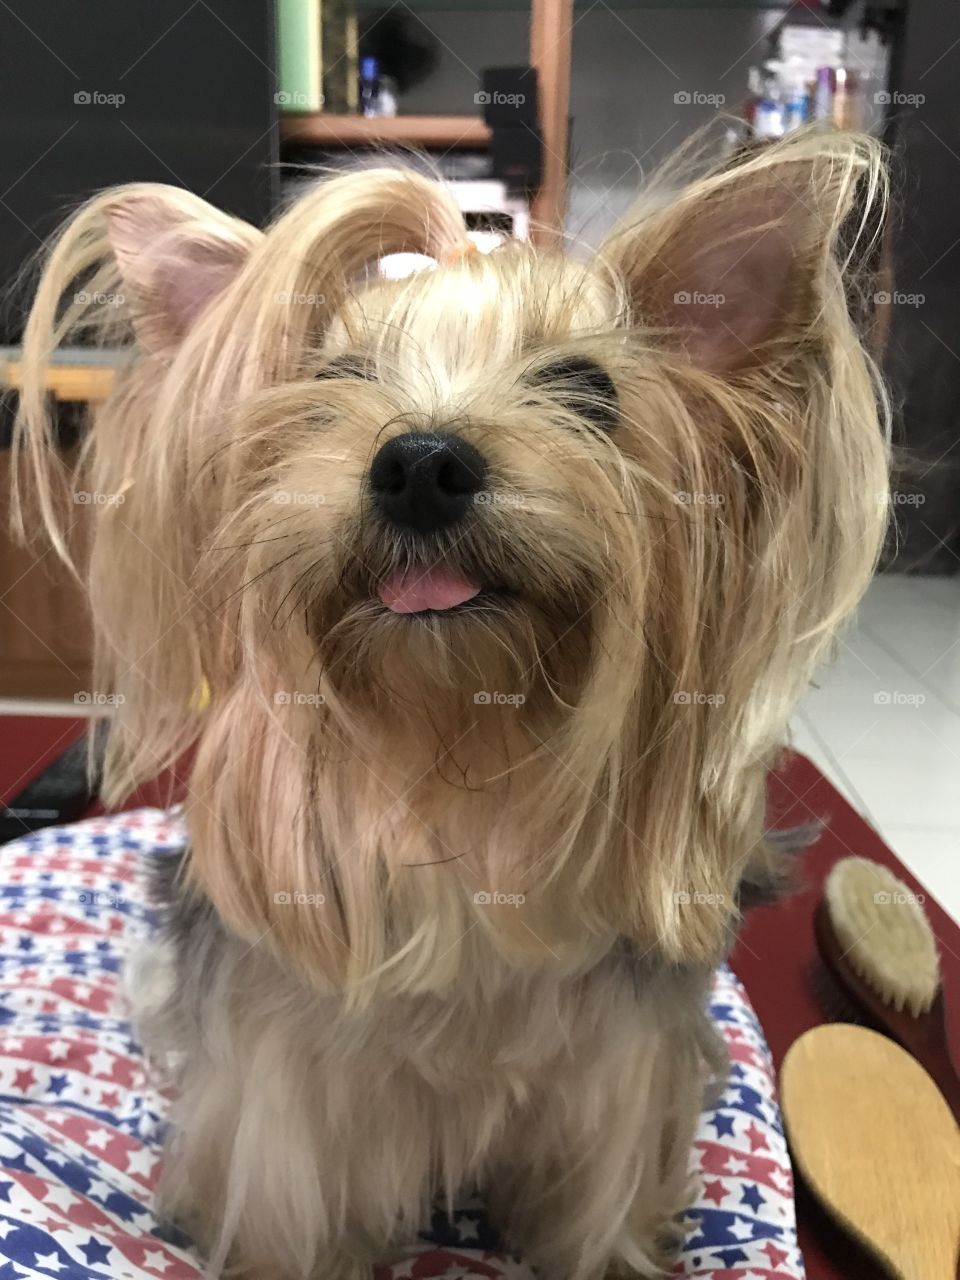 The mouth and tongue of my dog, dog mouth. (yorkshire terrier)